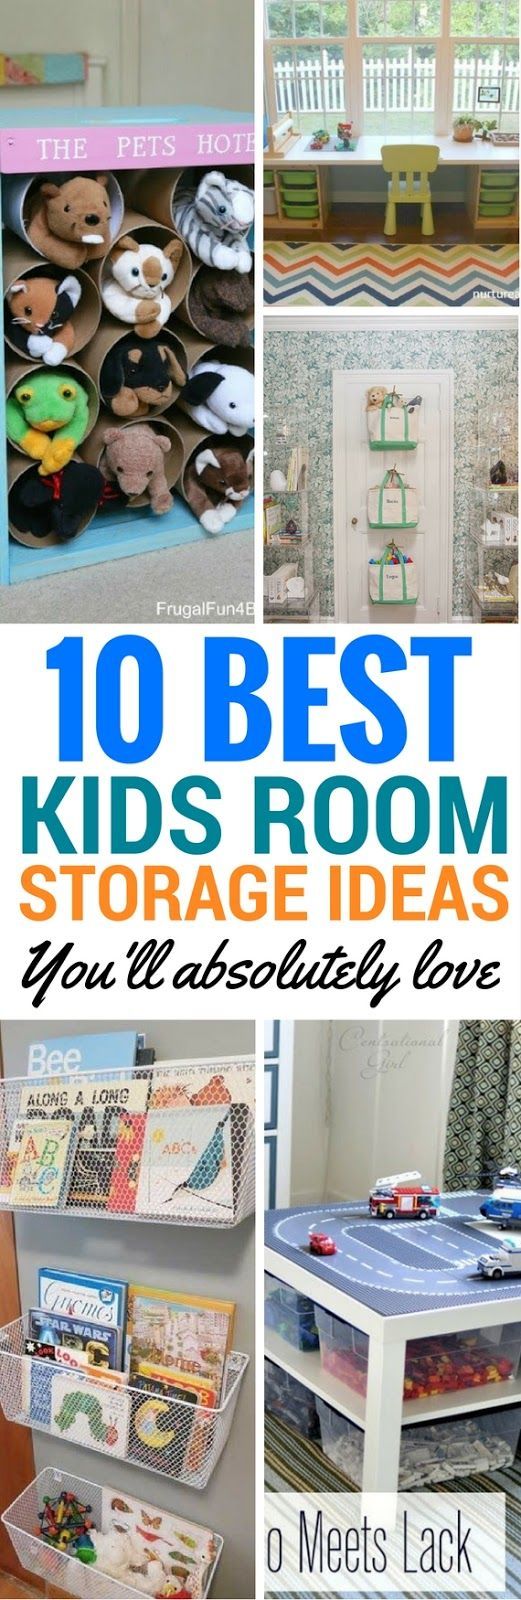 10 Kids Room Ideas And Storage Solutions For Both Girls And Boys – Cheap and cool ways to make your kids room organized and look